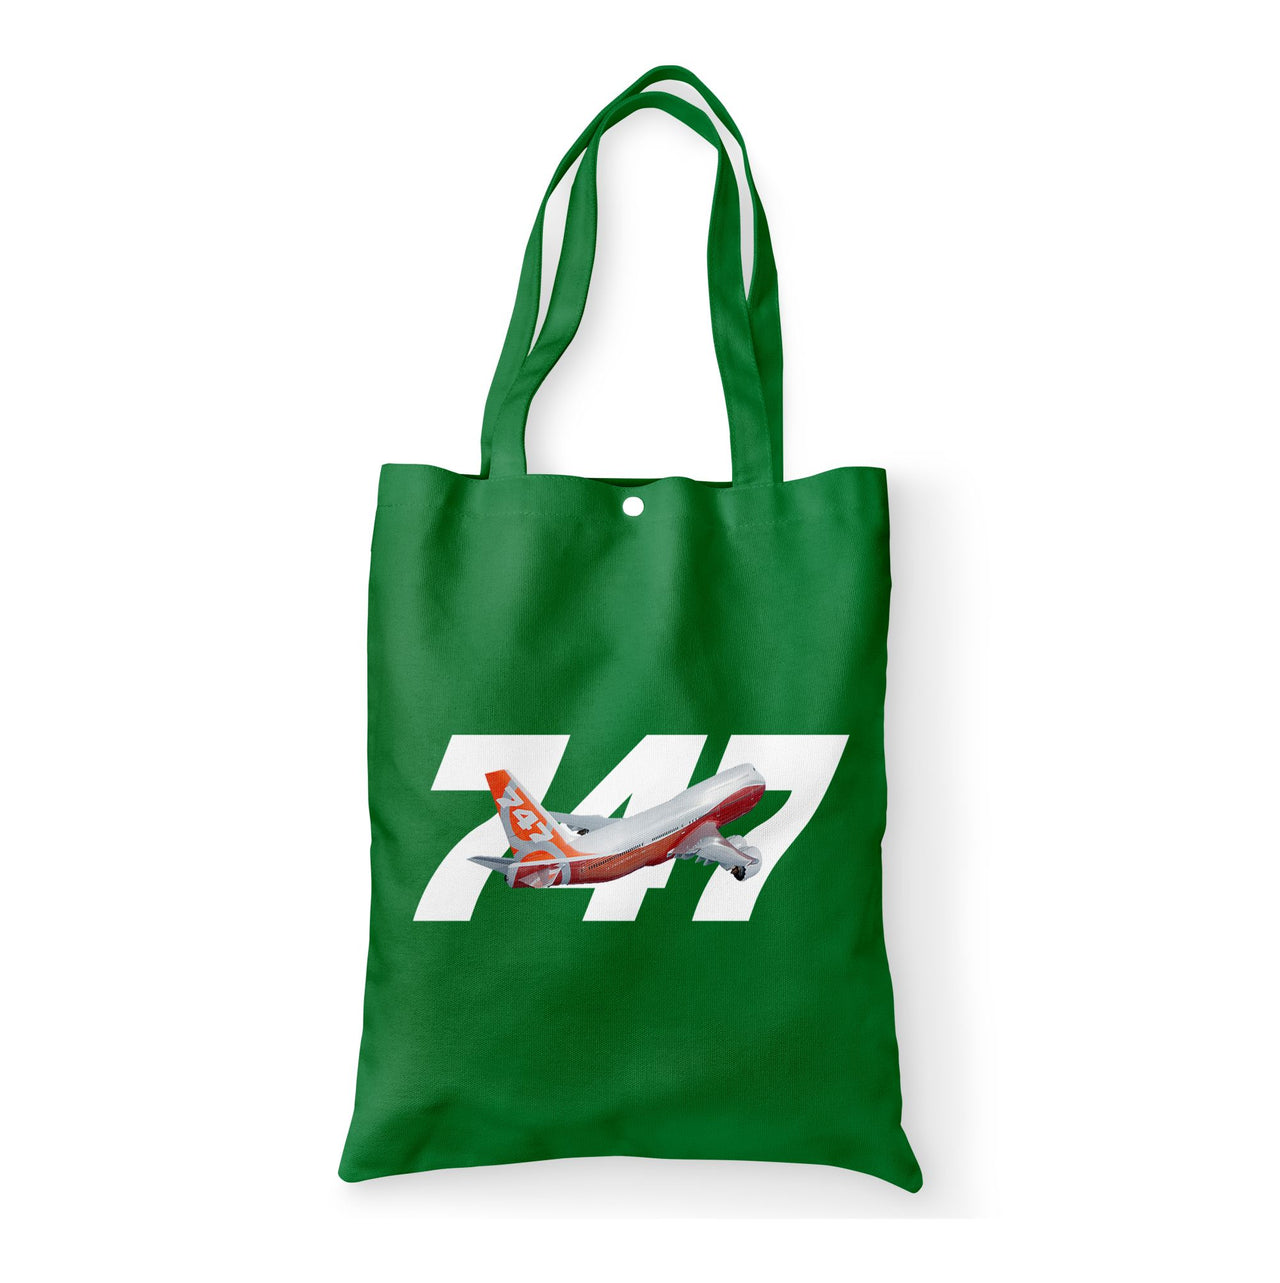 Super Boeing 747 Intercontinental Designed Tote Bags